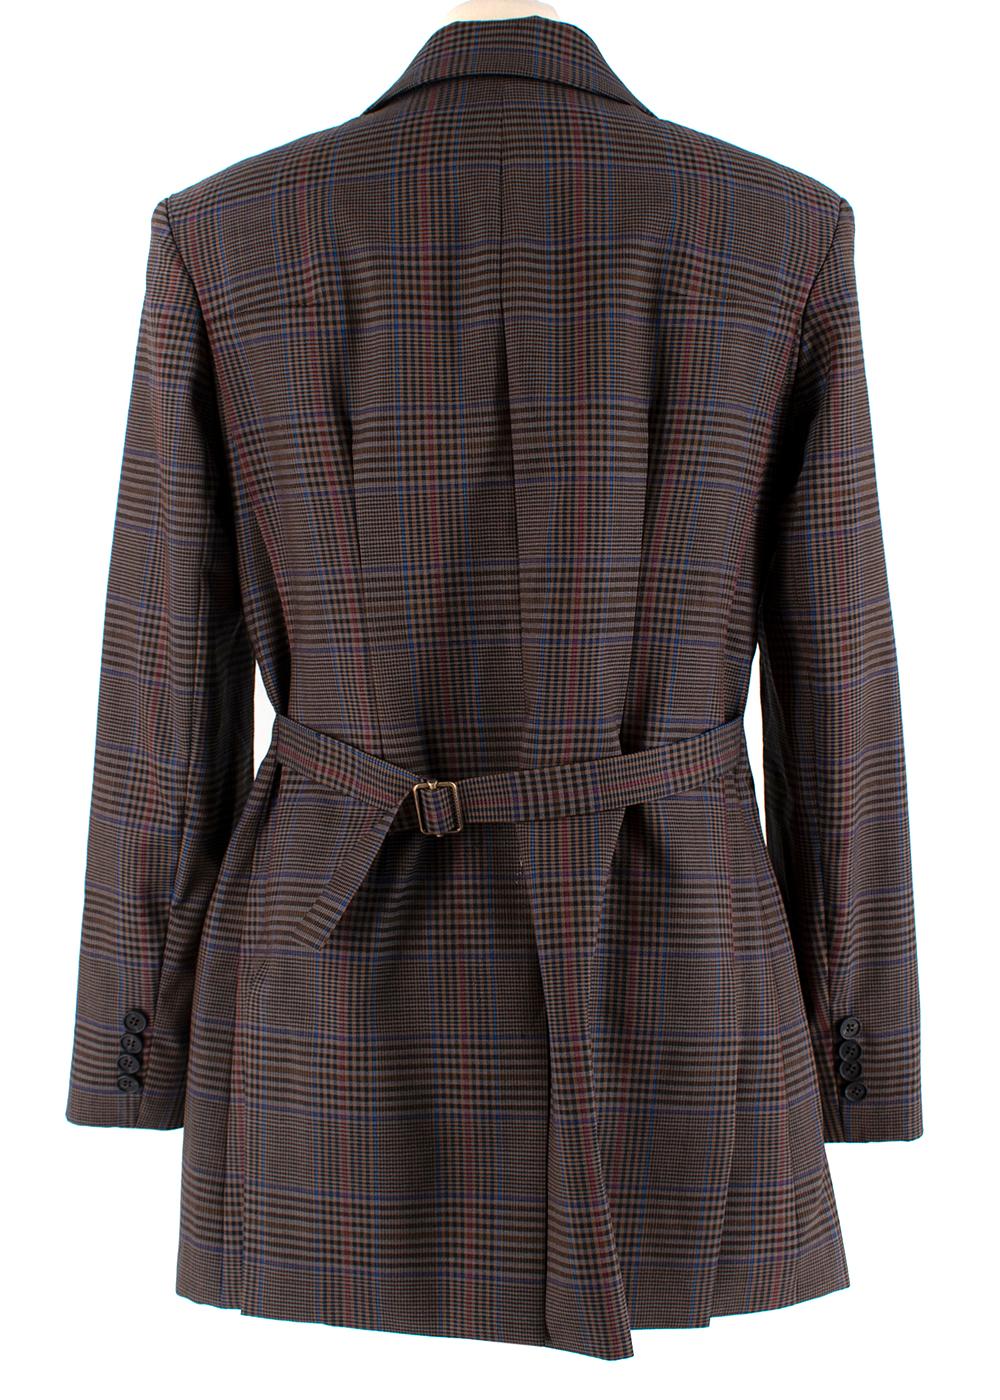 Monse Check Wool Blend Blazer

This amazingly fitted Monse check stretch wool-blend blazer is the perfect addition to your office wardrobe! 
 
Double breasted style, shoulder pads, three pockets and button detailing on sleeves. Vent opening at back